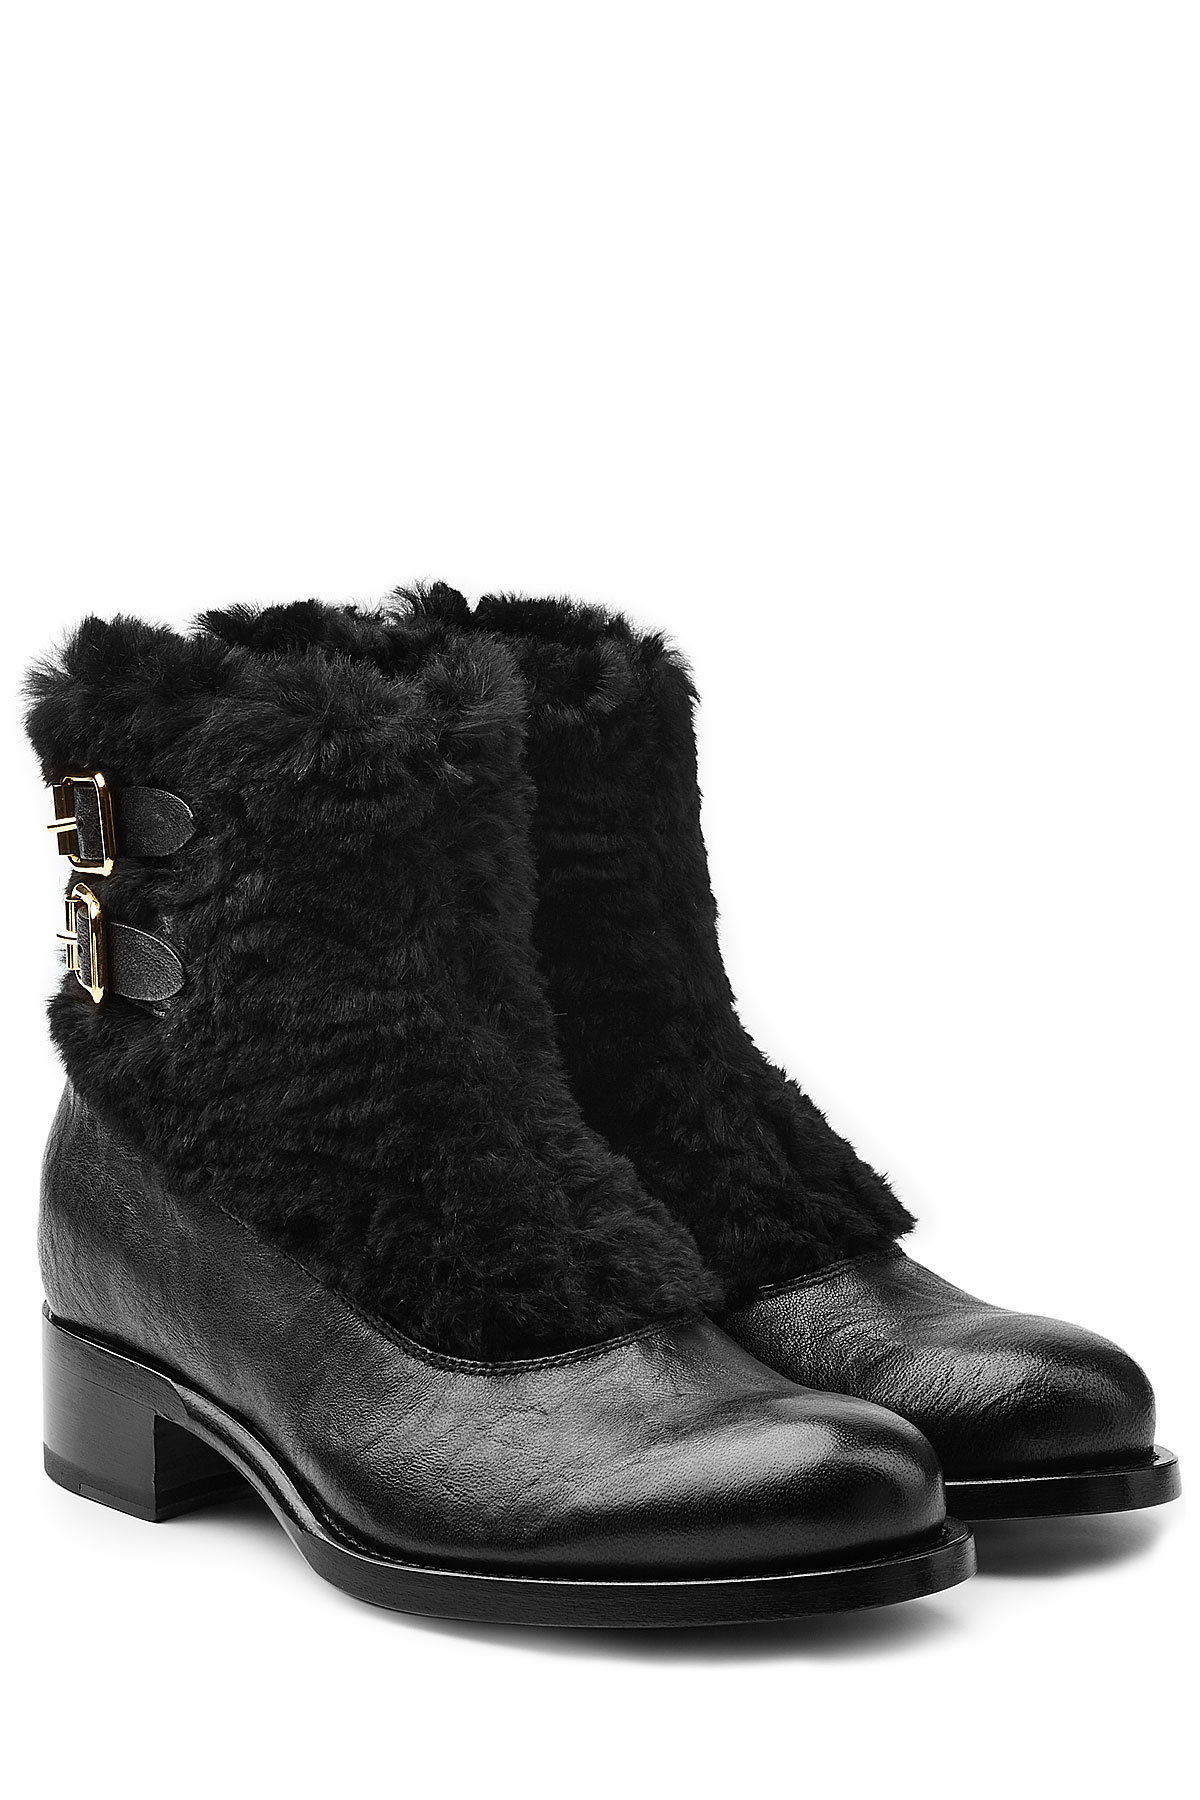 Rupert Sanderson - Leather Ankle Boots with Fur